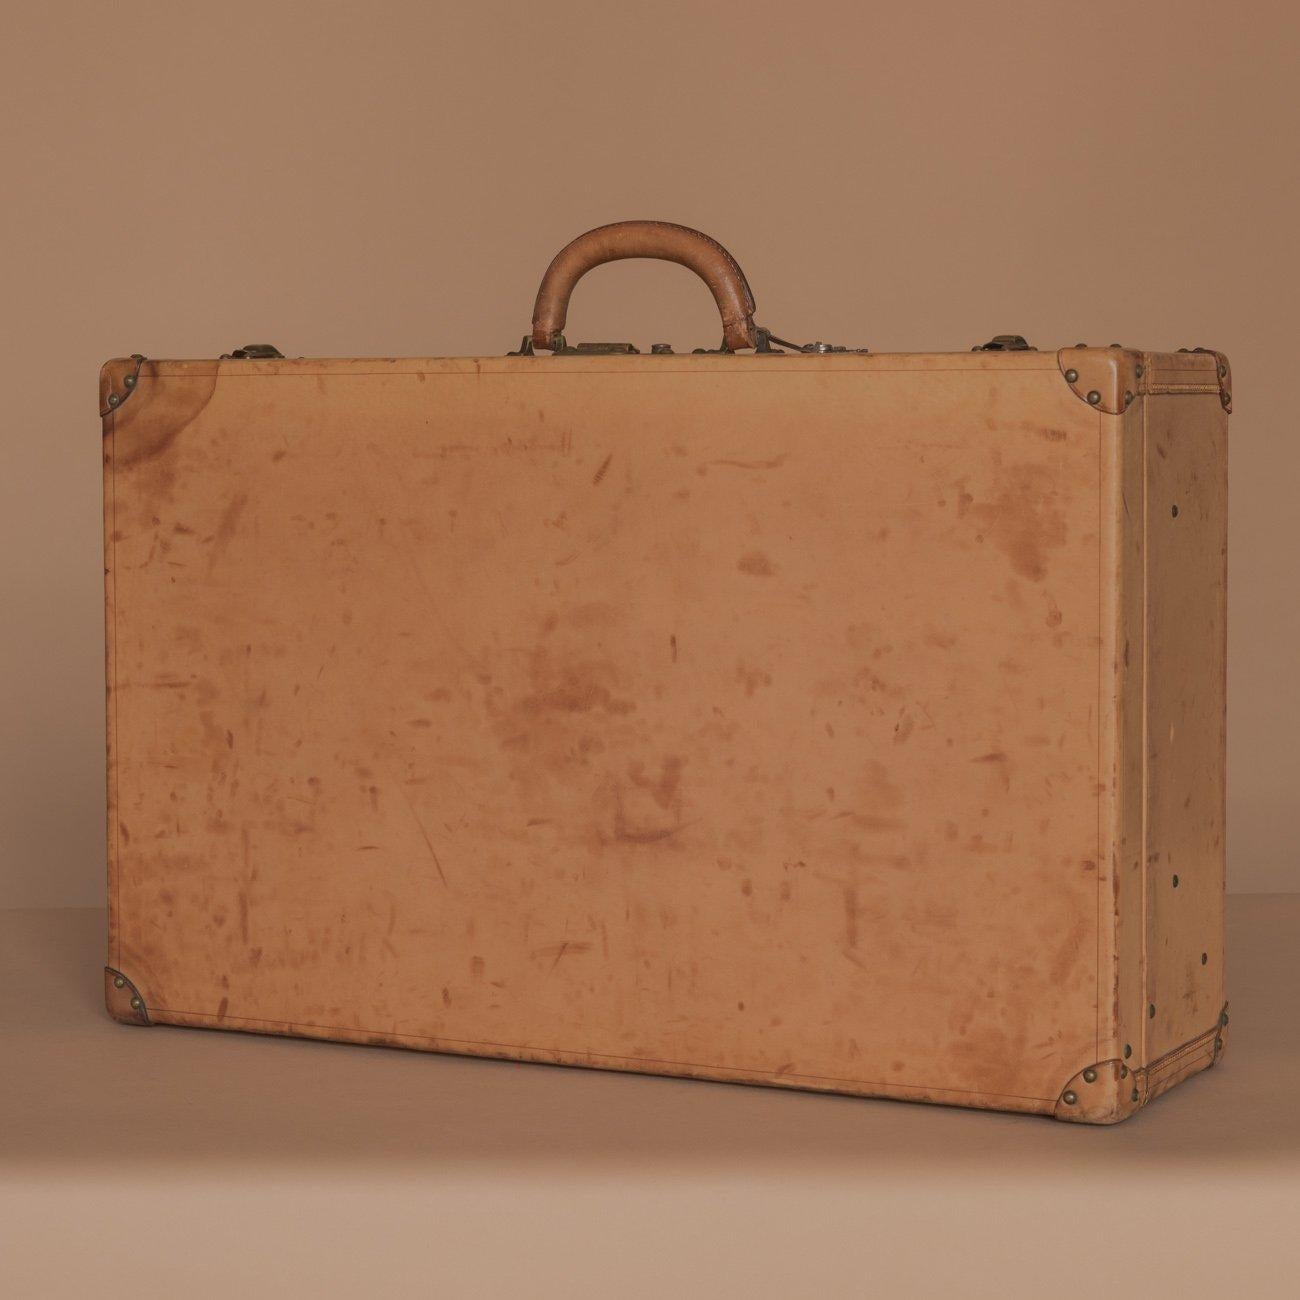 A lovely 'Vache Naturelle' case by Louis Vuitton. With original tray and leather lined interior that would have held a range of fittings; Circa 1935. This case also has three keys.

Dimensions: 67.5 cm/26⅝ inches x 42 cm/16½ inches x 21 cm/8¼